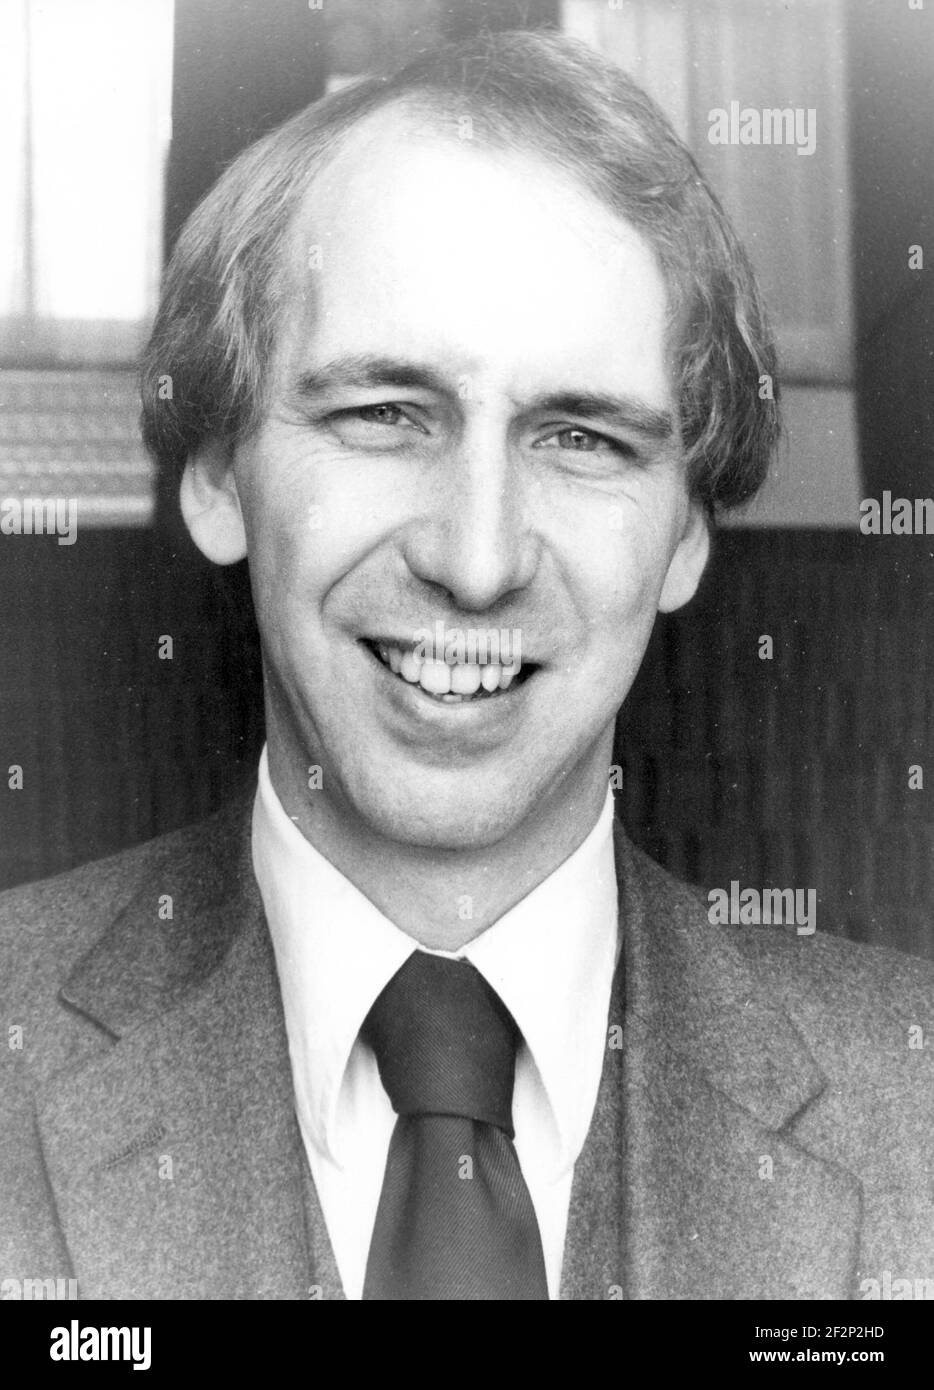 TORY CANDIDATE PATRICK ROCK, PORTSMOUTH SOUTH BY ELECTION. PIC MIKE WALKER, 1984 Stock Photo